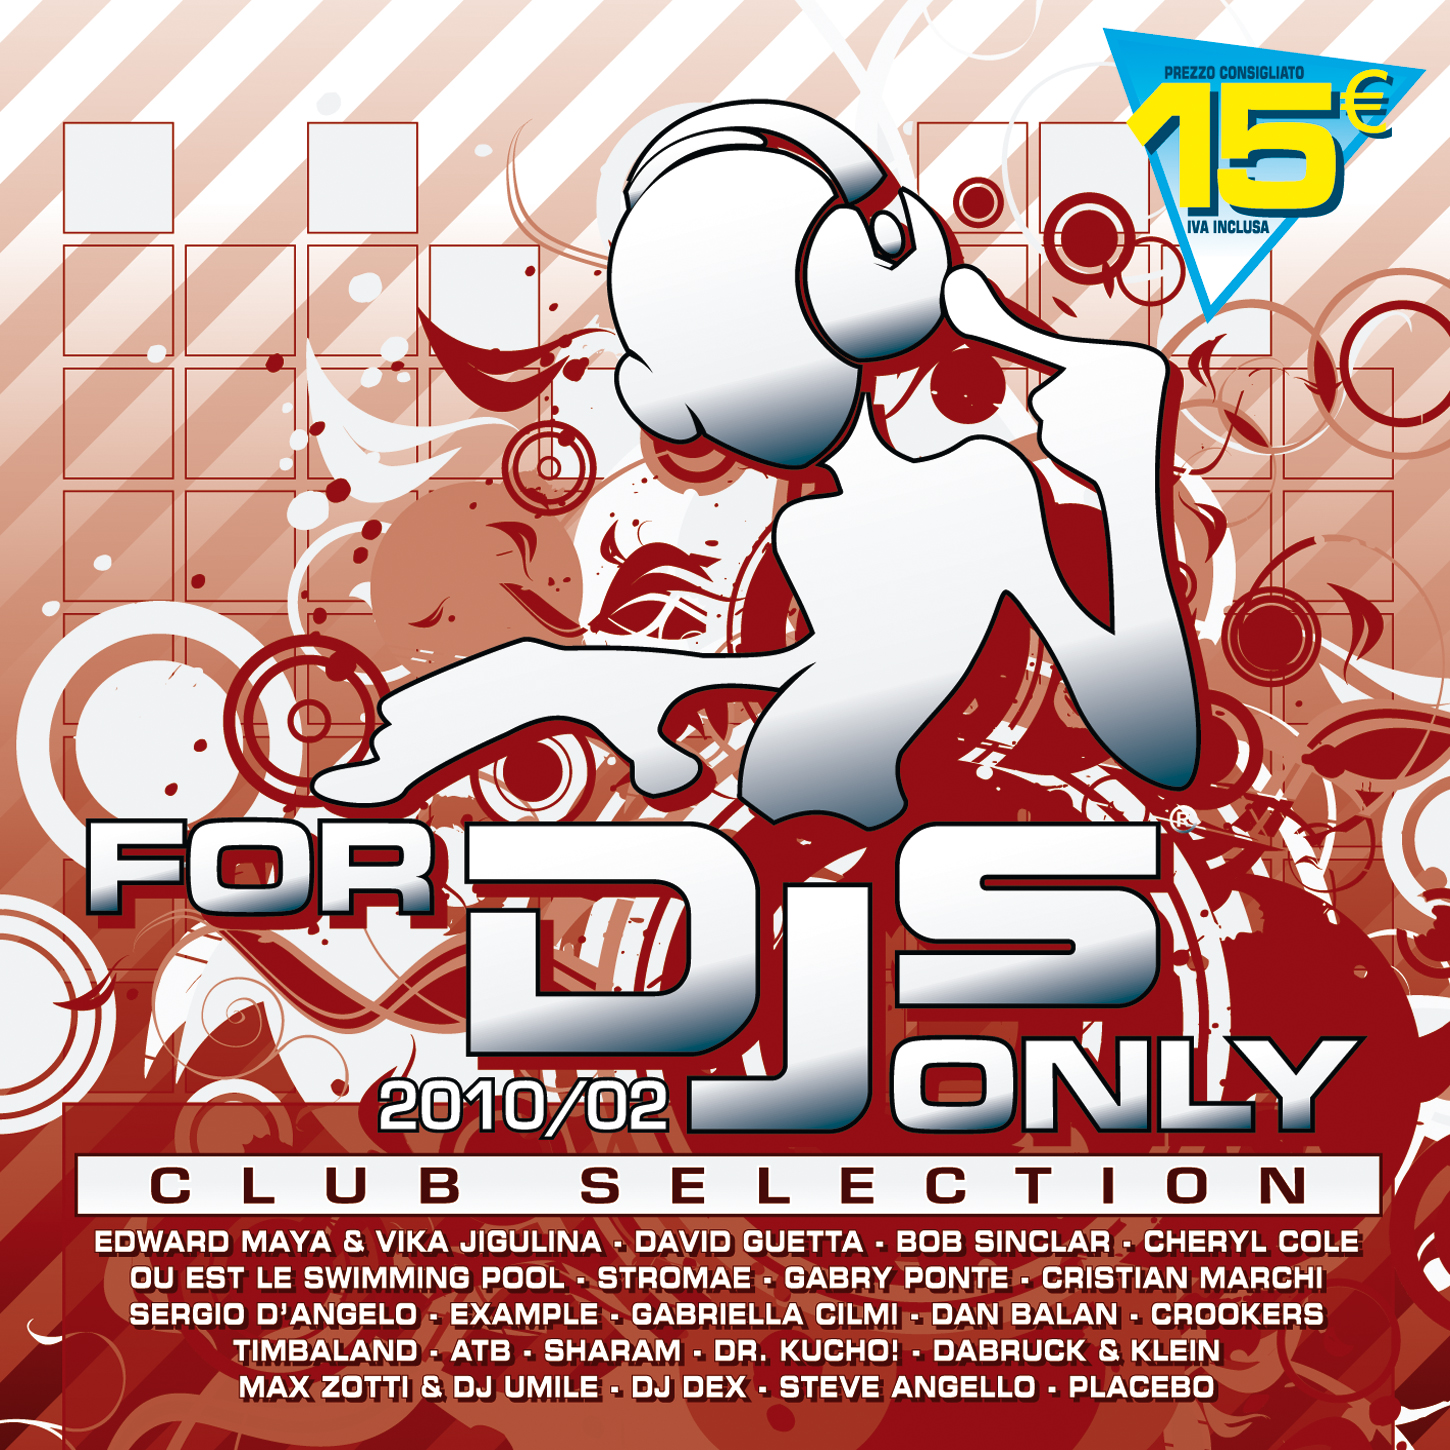 FOR DJS ONLY 2010/02